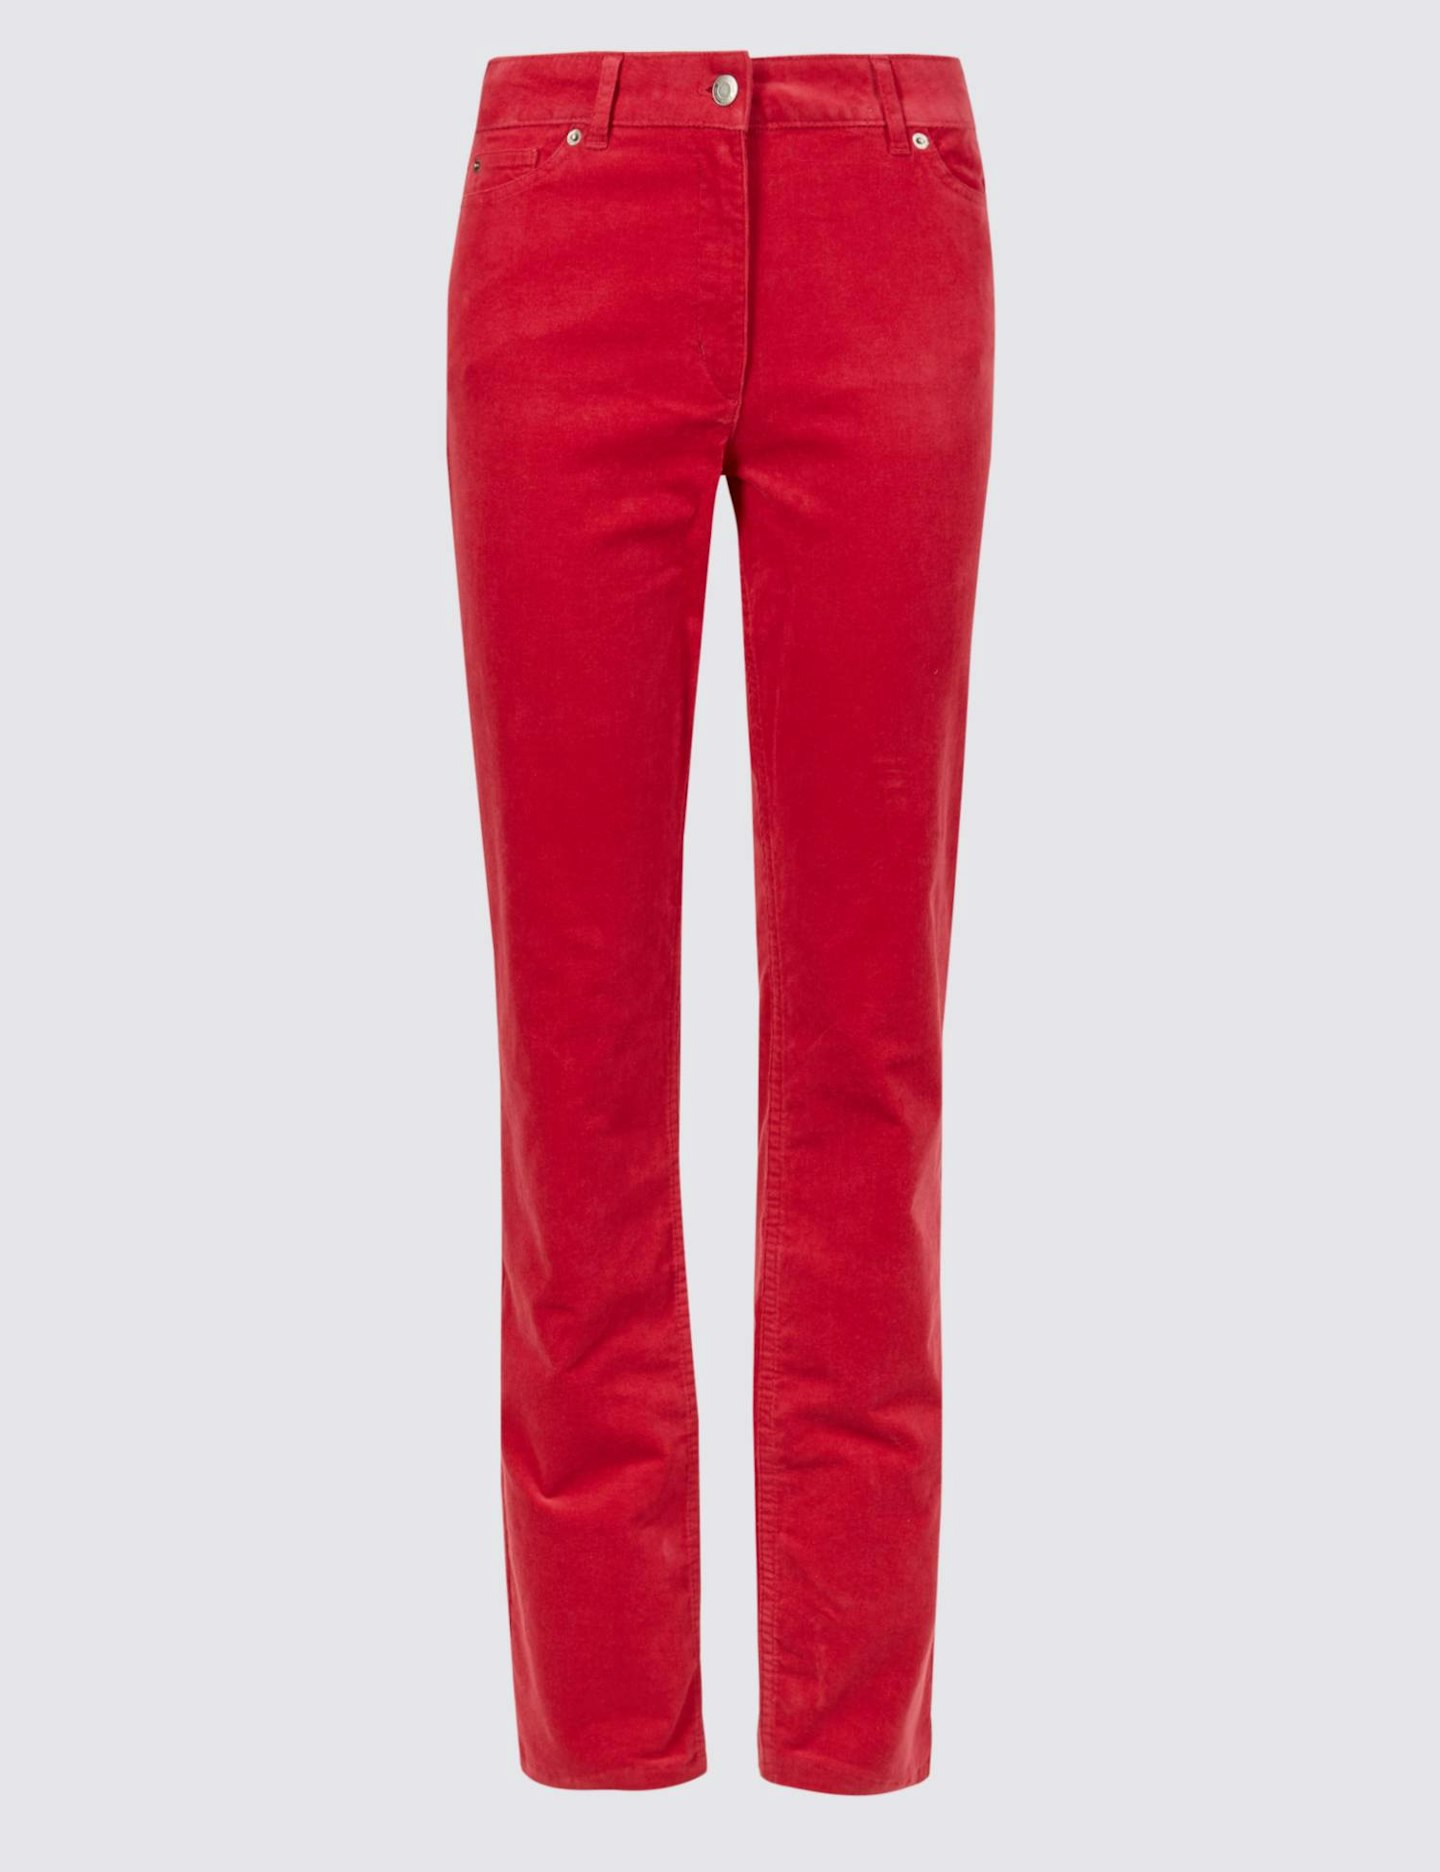 M&S Collection, Corduroy Straight Leg Trousers, £19.50